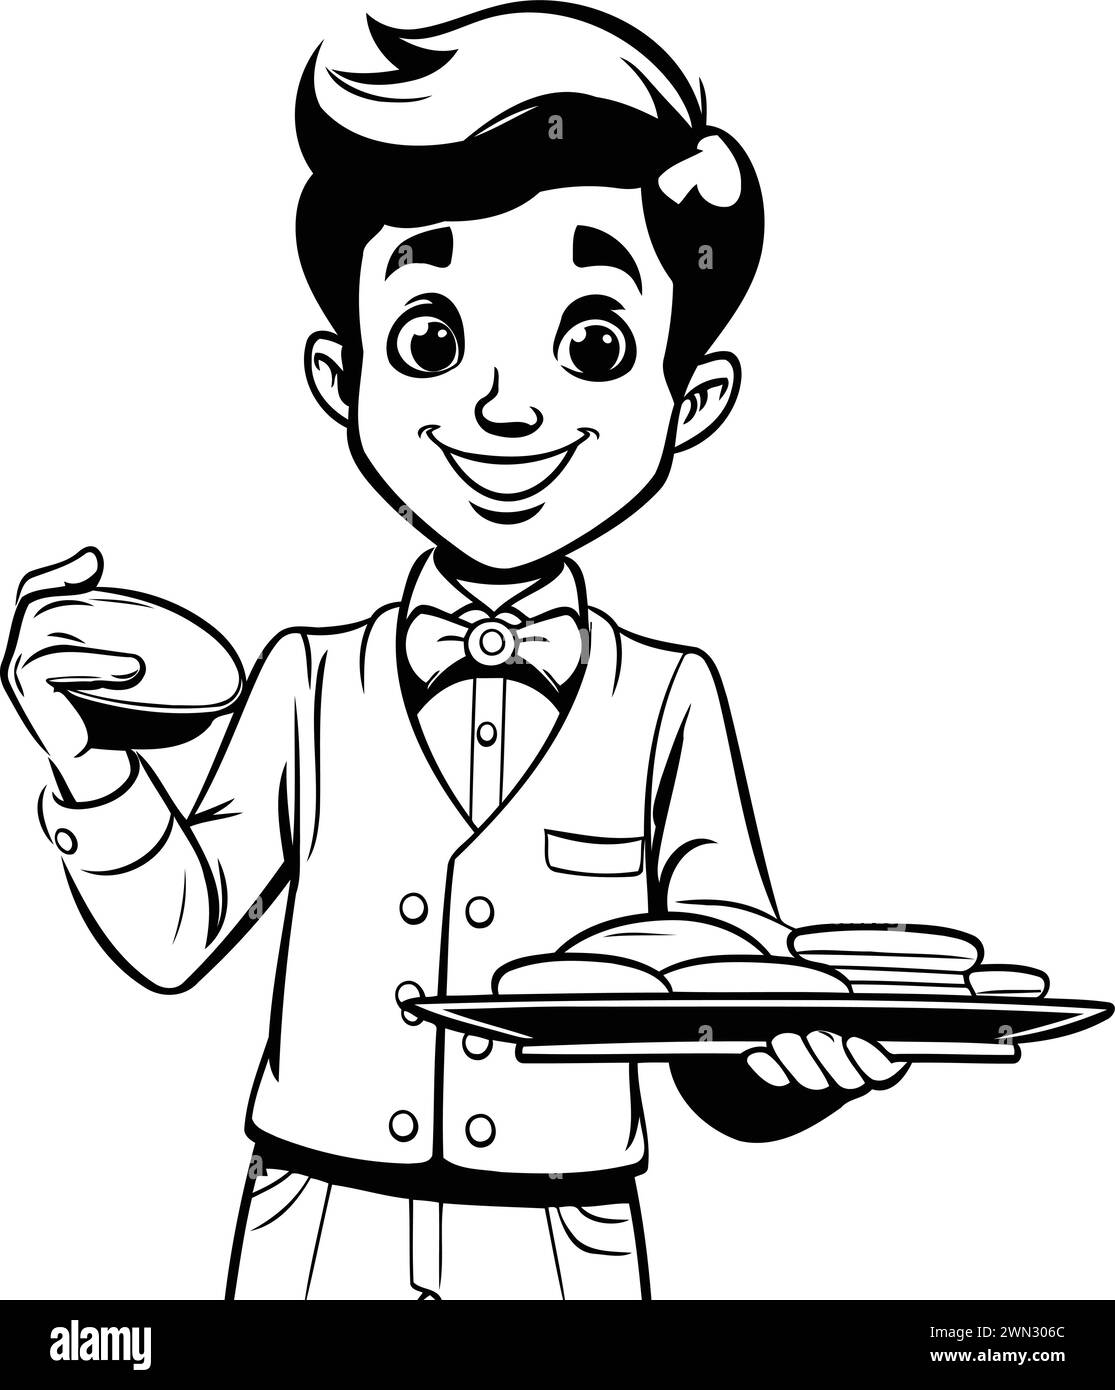 Cartoon image of a young waiter holding a tray of food. Stock Vector